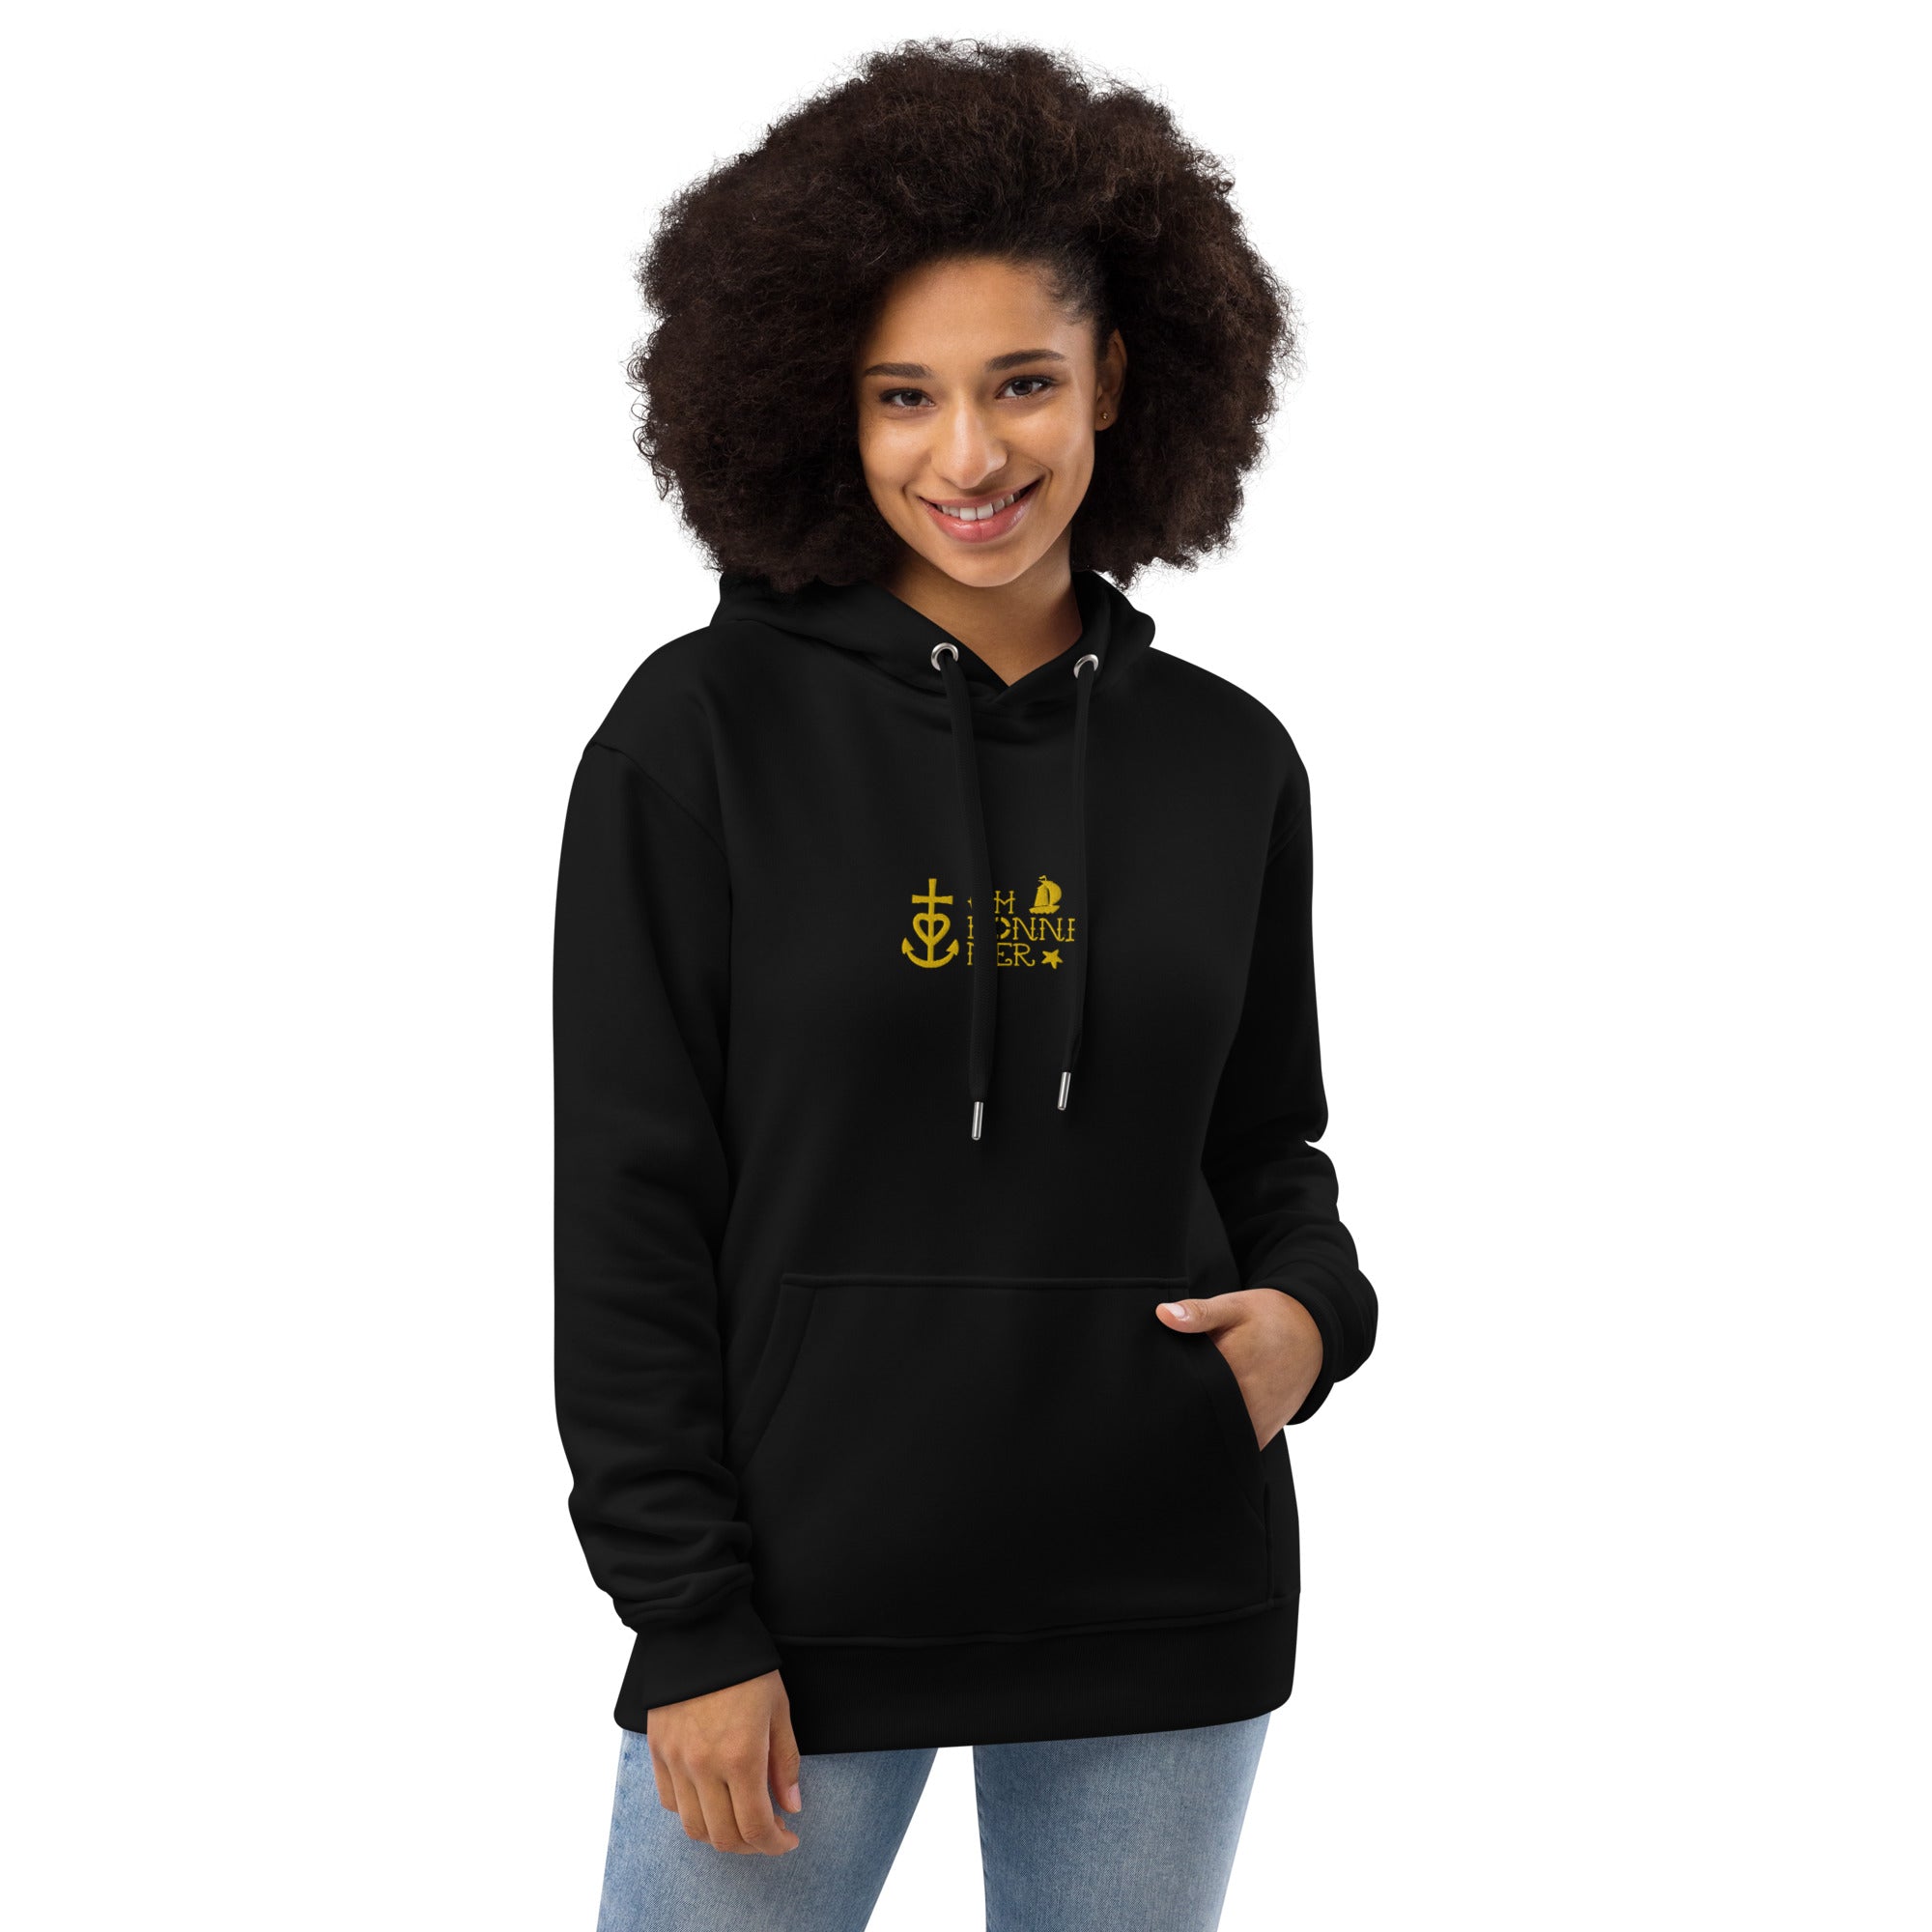 Premium eco hoodie Oh Bonne Mer 2 small embroided pattern on front